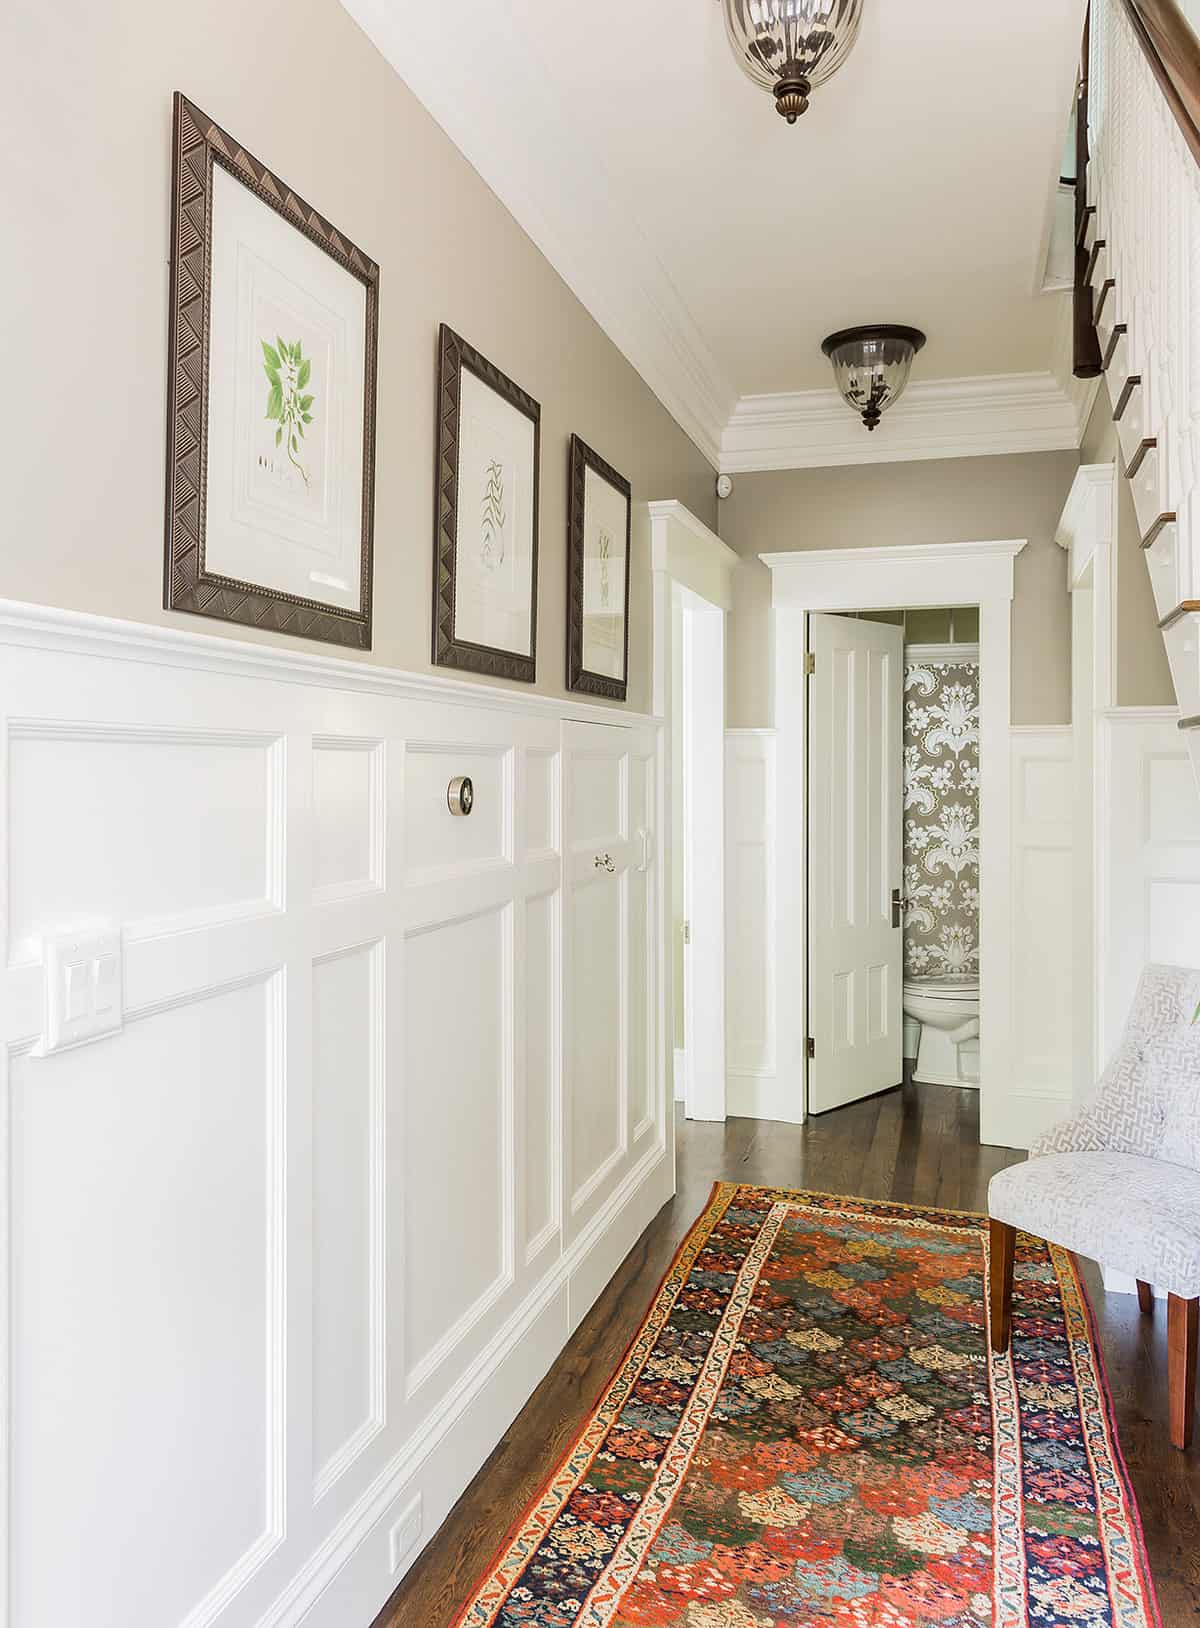 Front Hall with high wainscot paneling